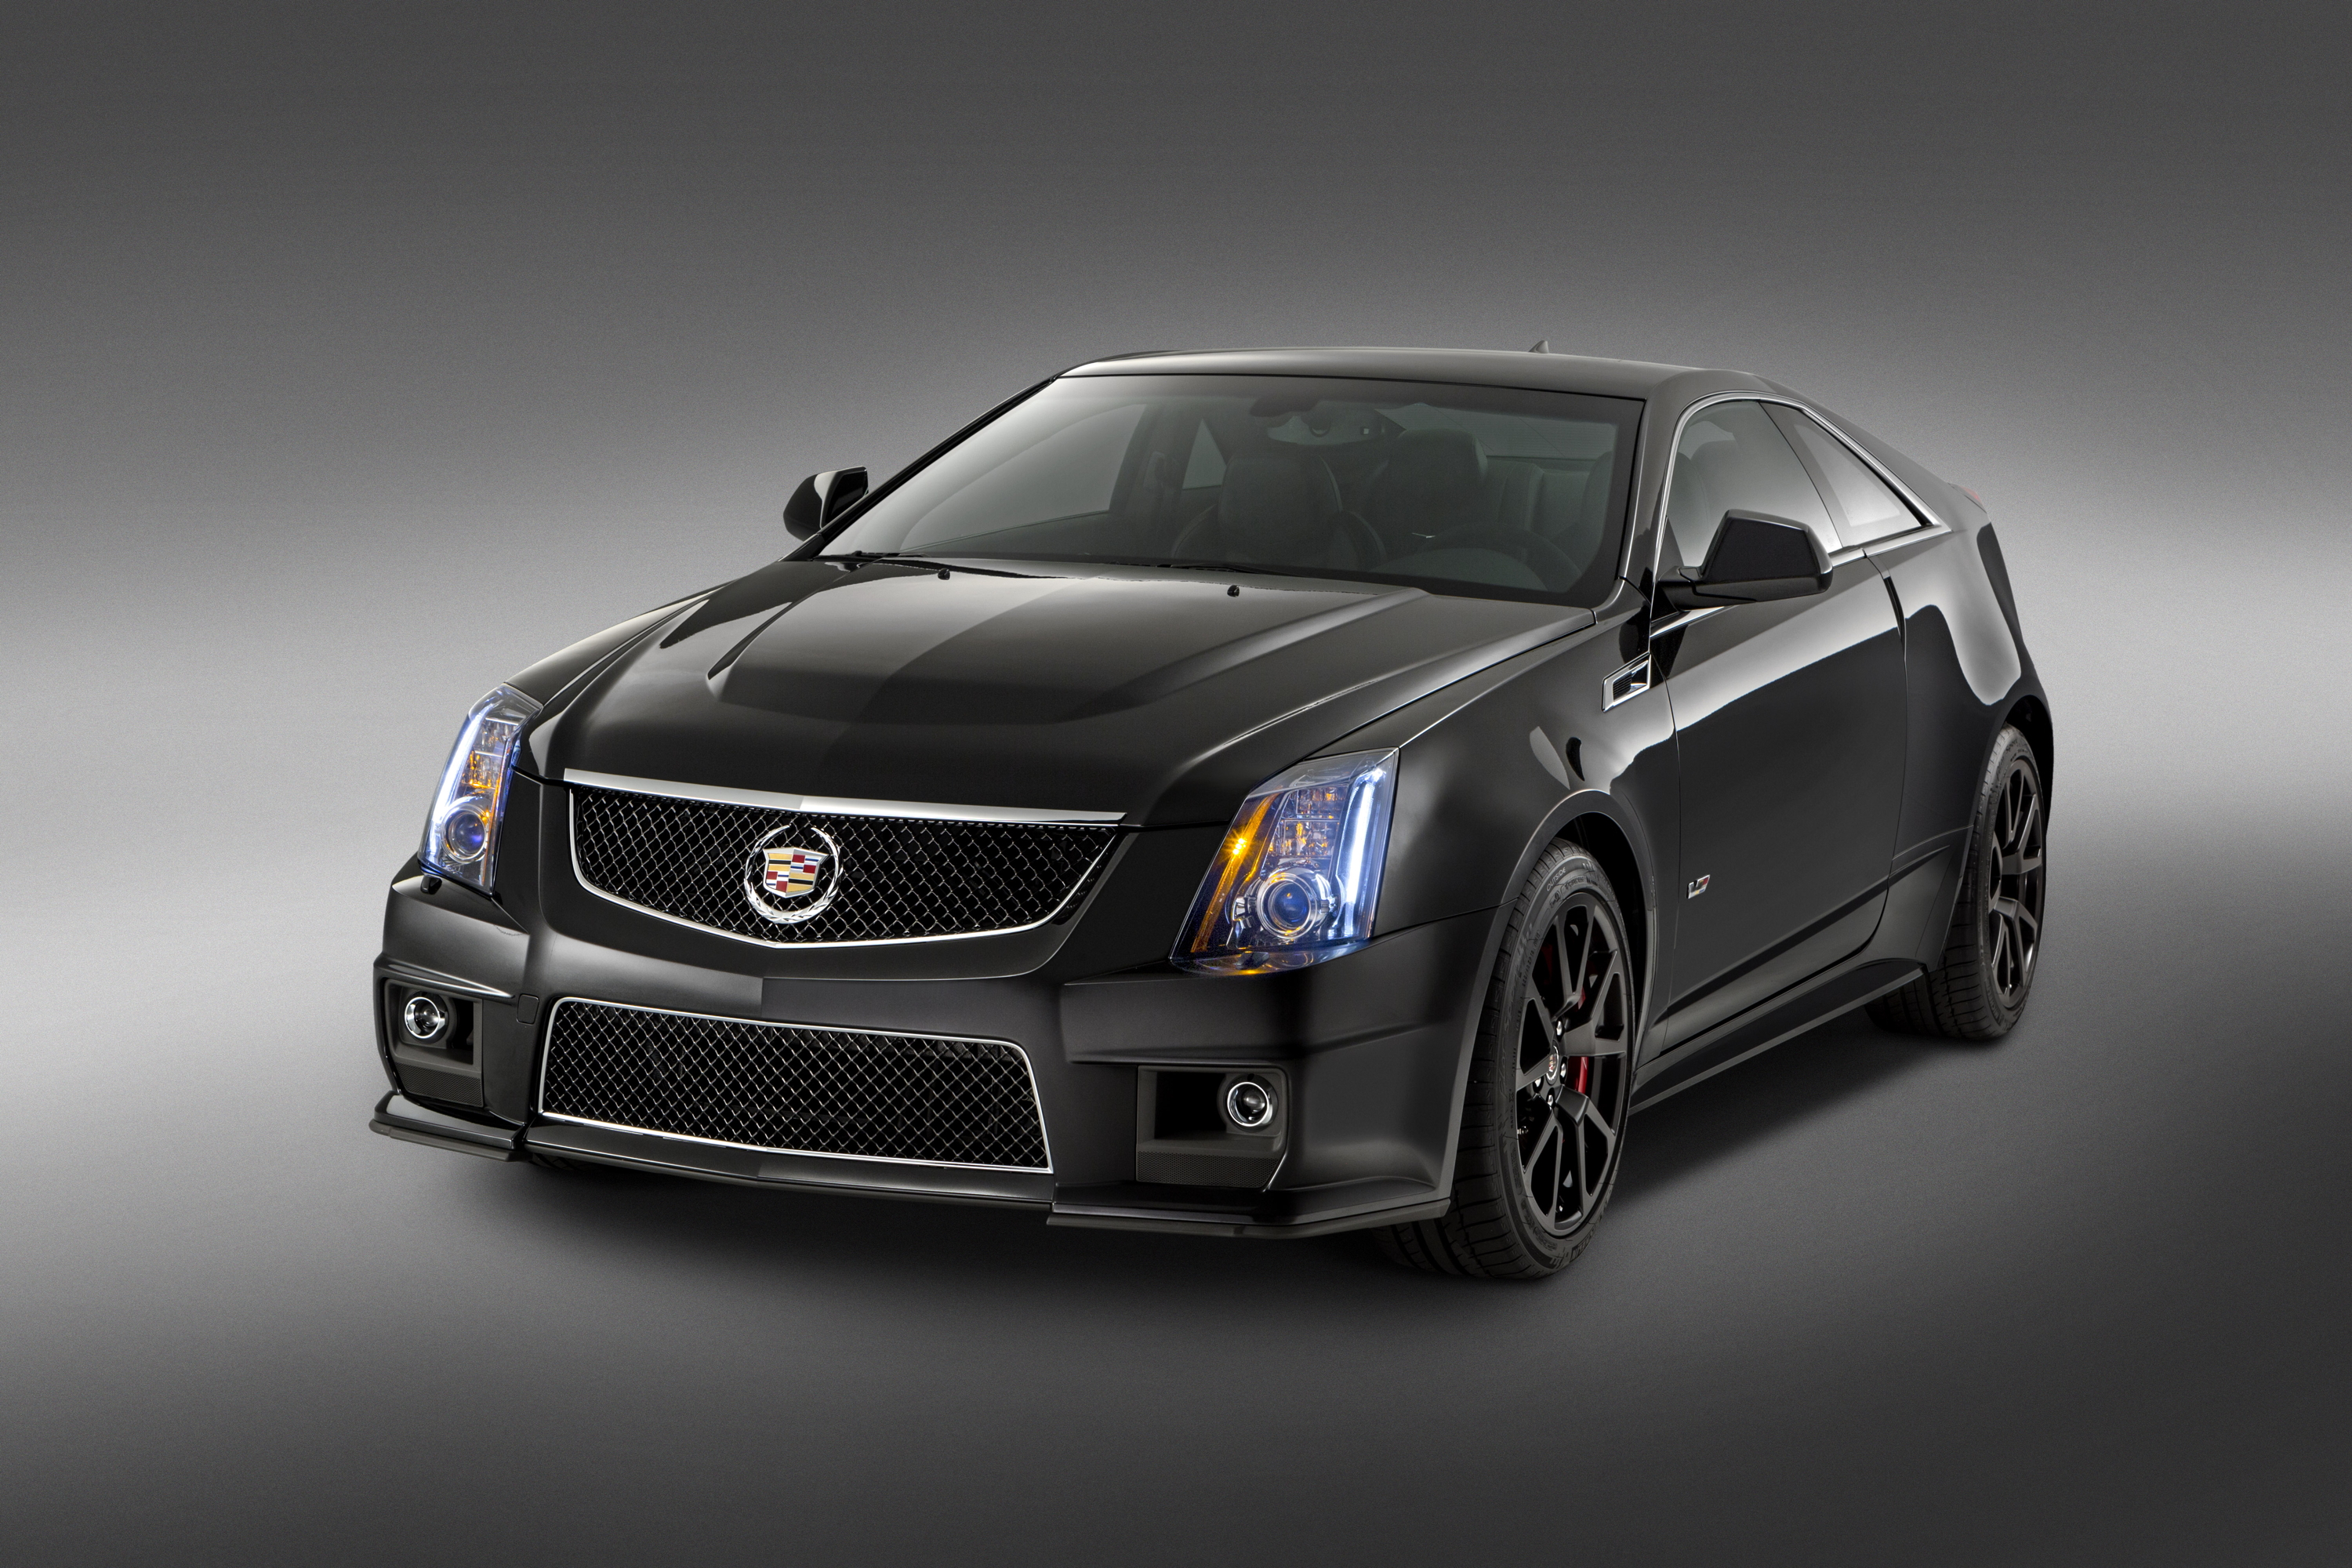 Cadillac Celebrates V-Series with 2015 CTS-V Coupe